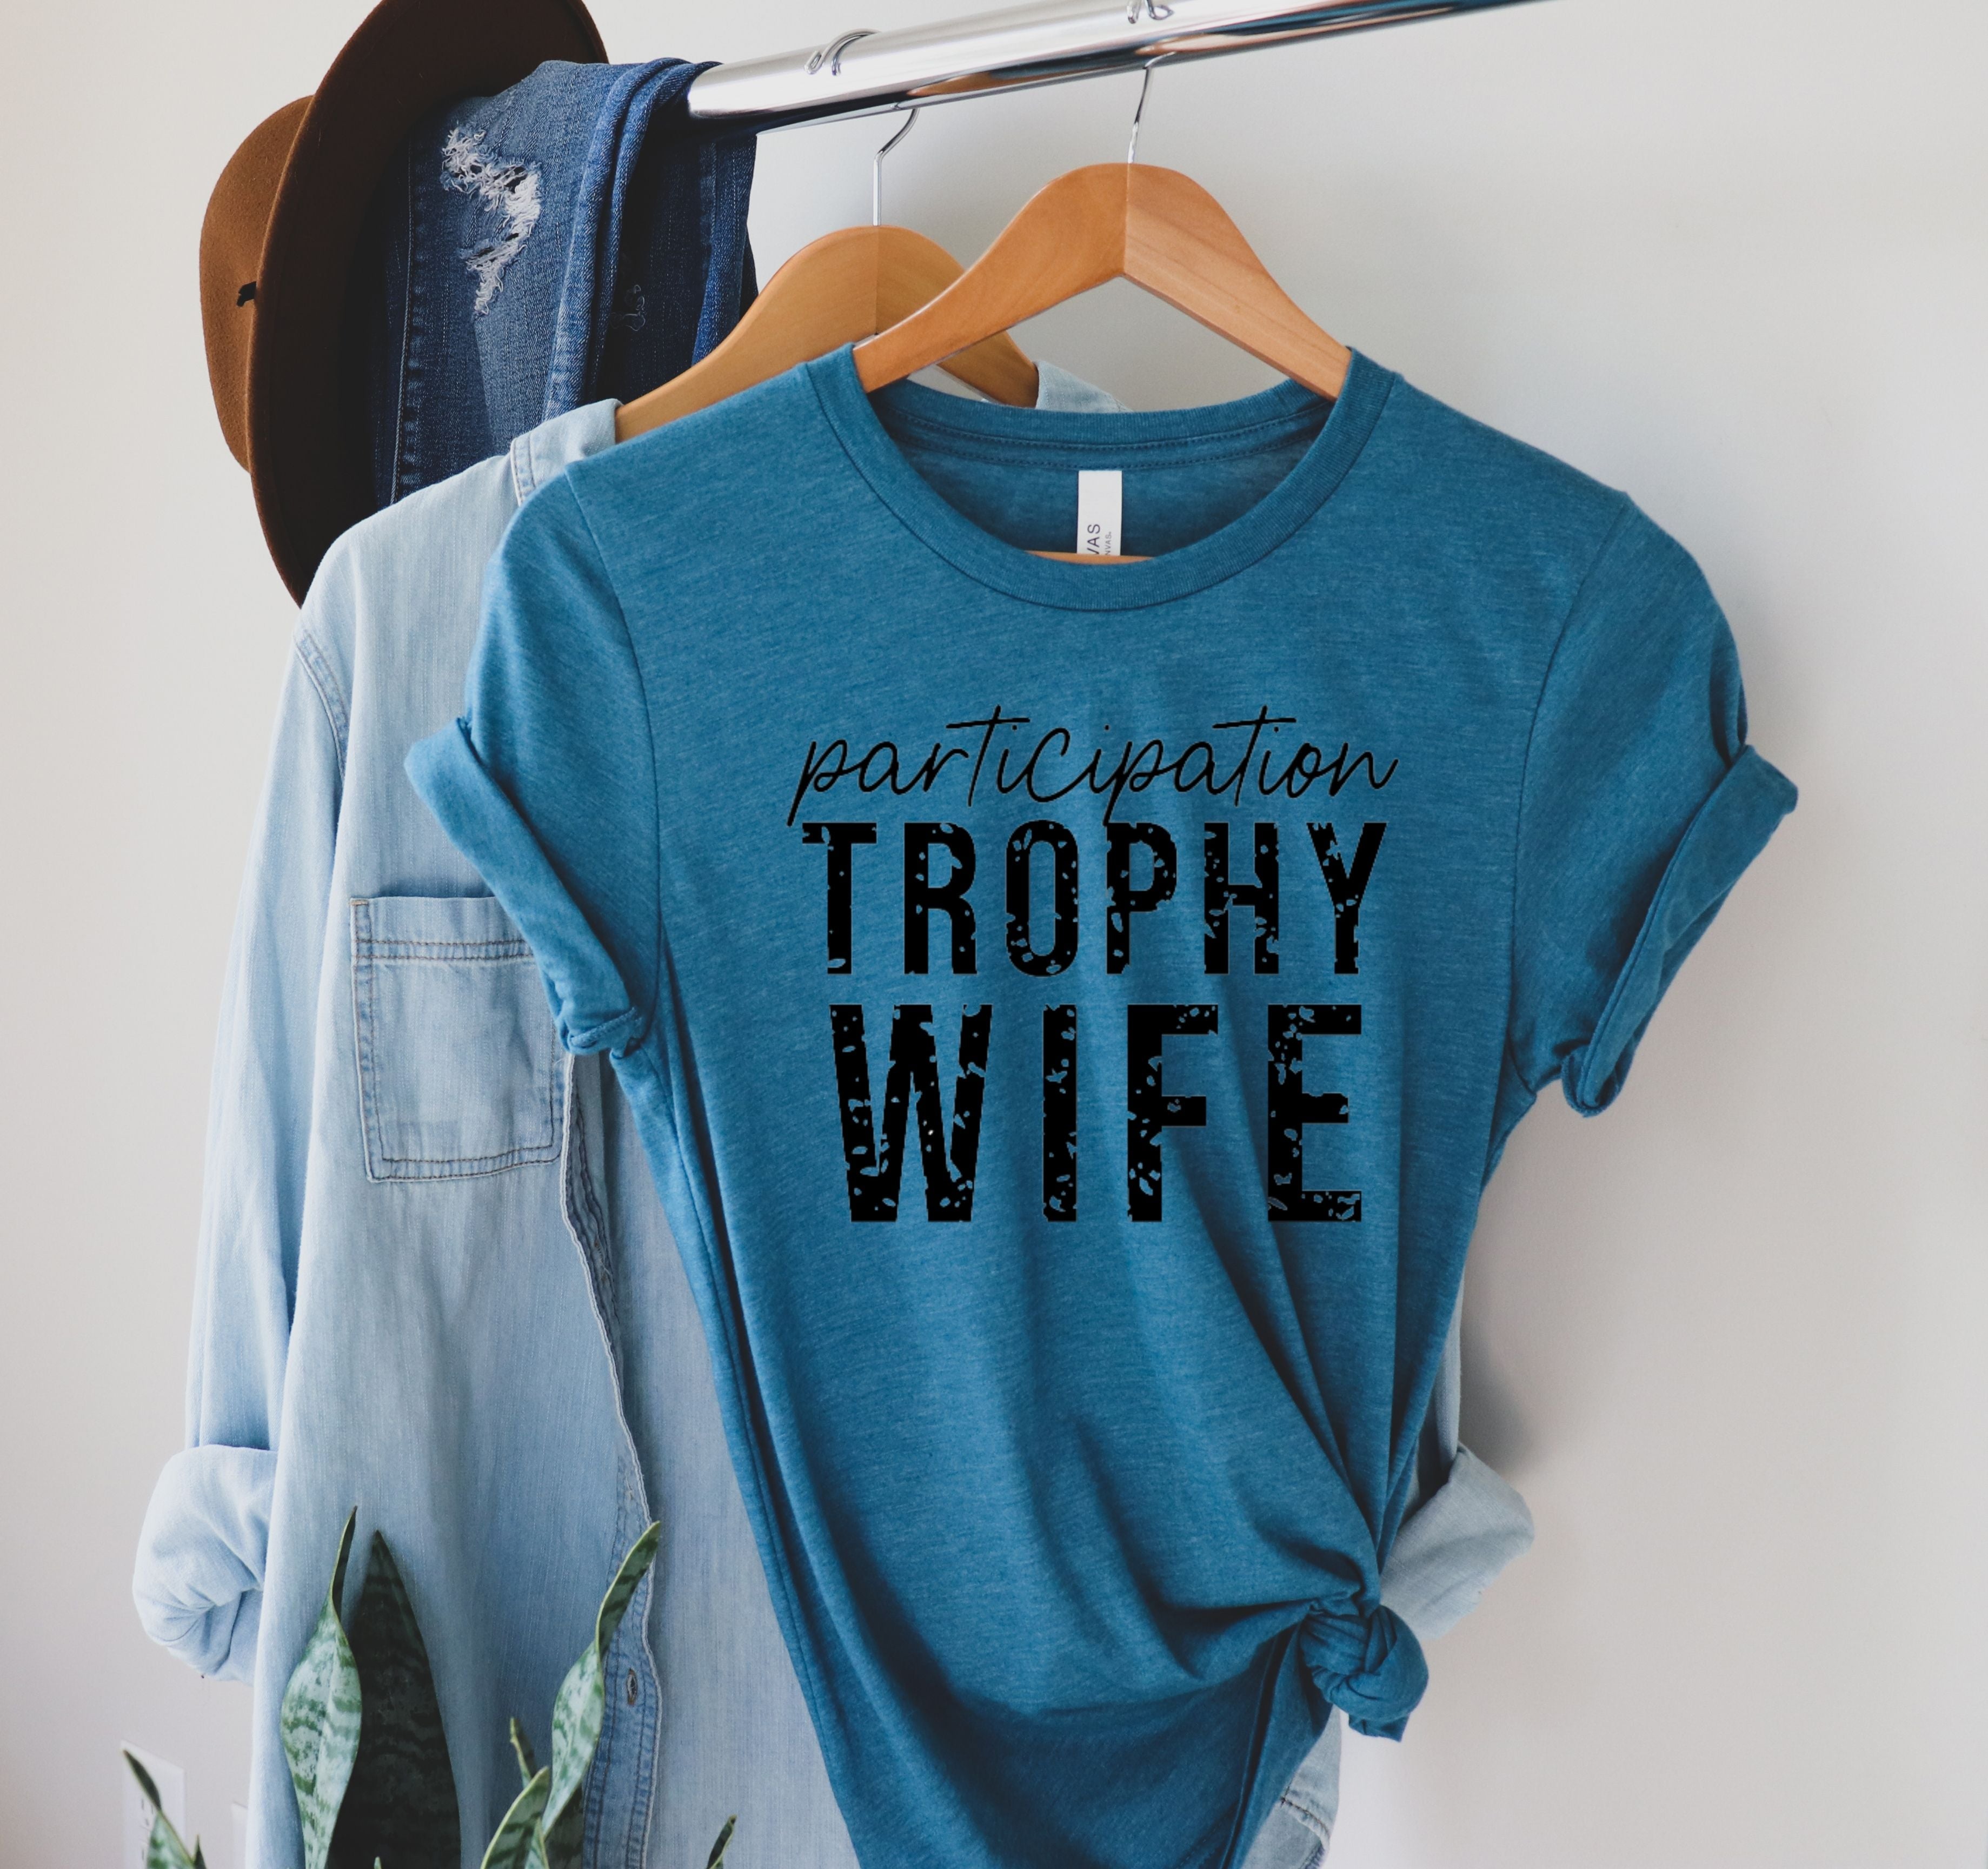 Participation Trophy Wife Shirt